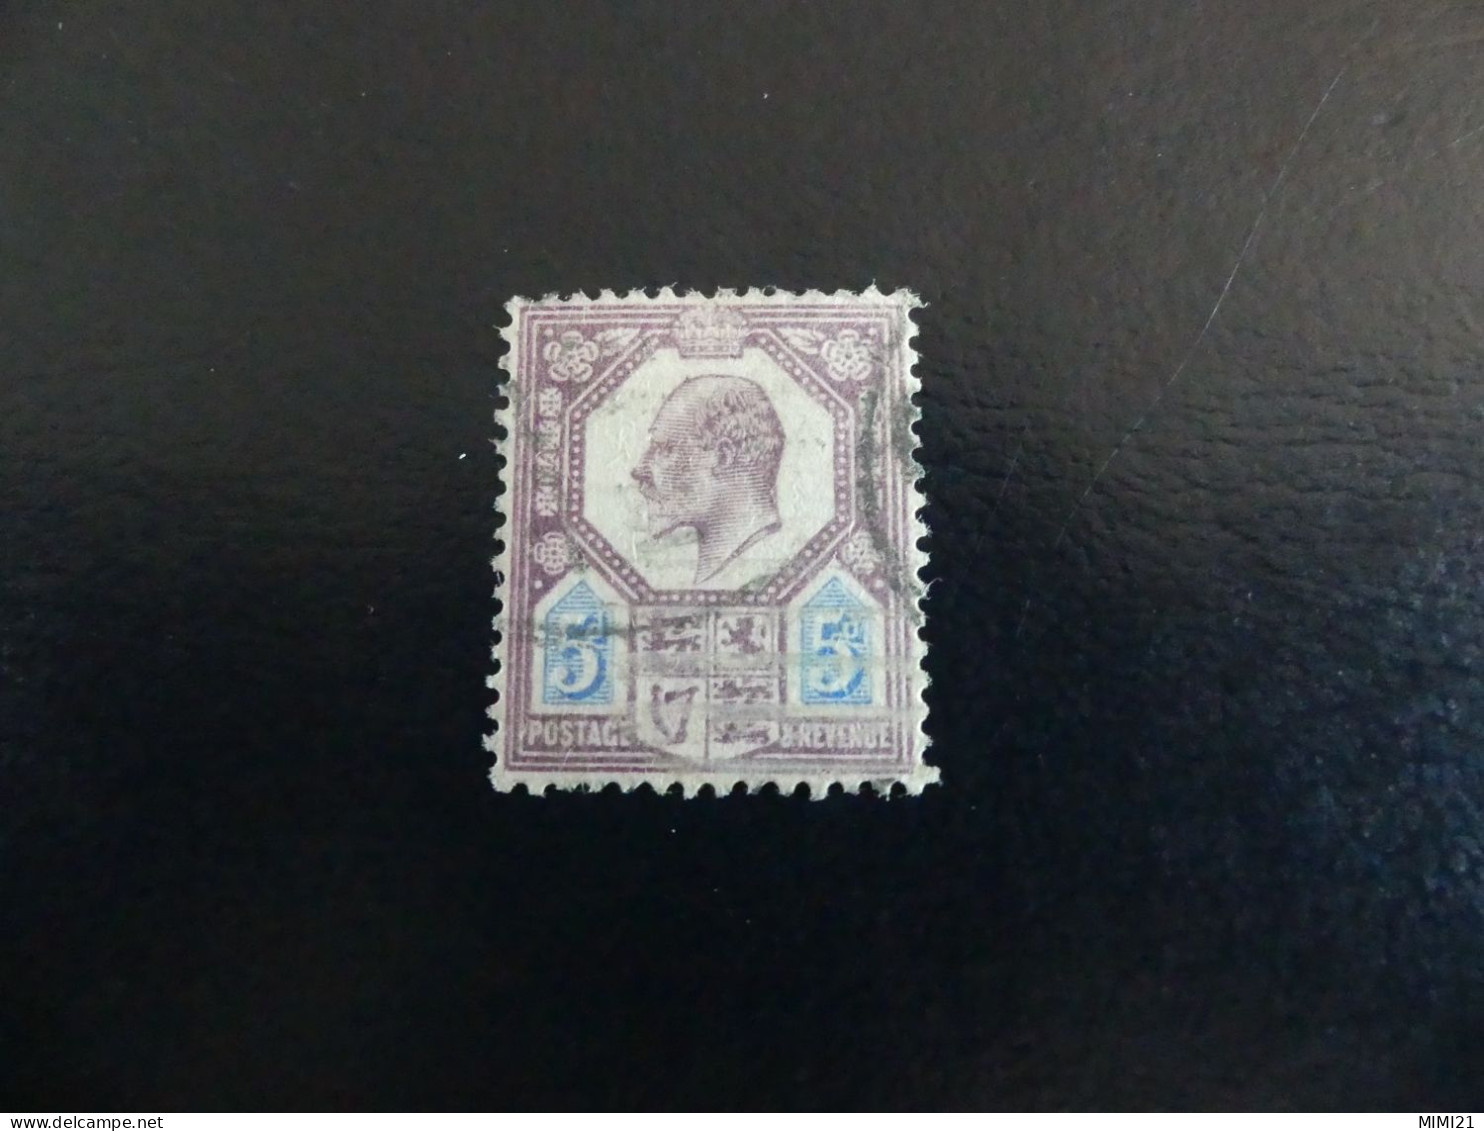 TP OBLITERE N°113 (cote 14) - Used Stamps